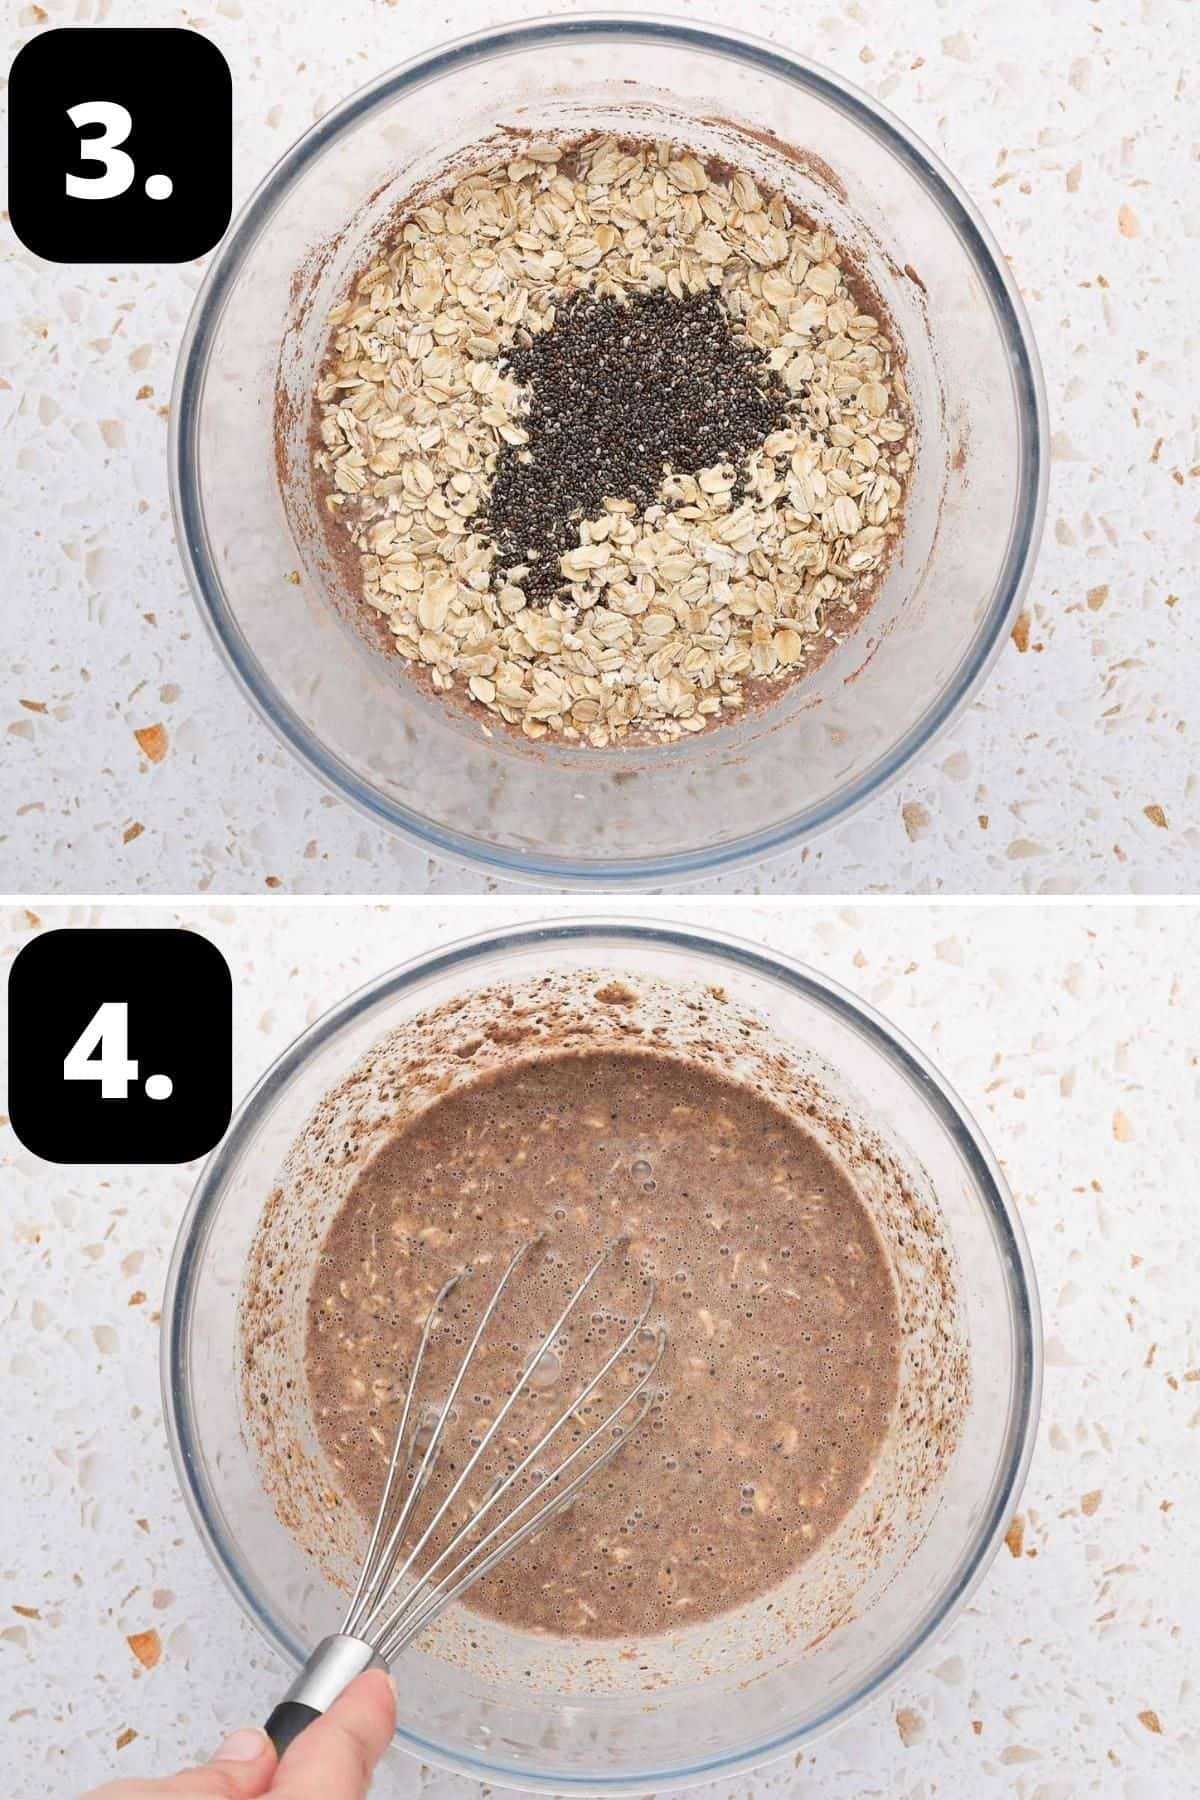 Steps 3-4 of preparing this recipe - adding the oats and chia to the wet ingredients and the mixture combined ready to go in the fridge.